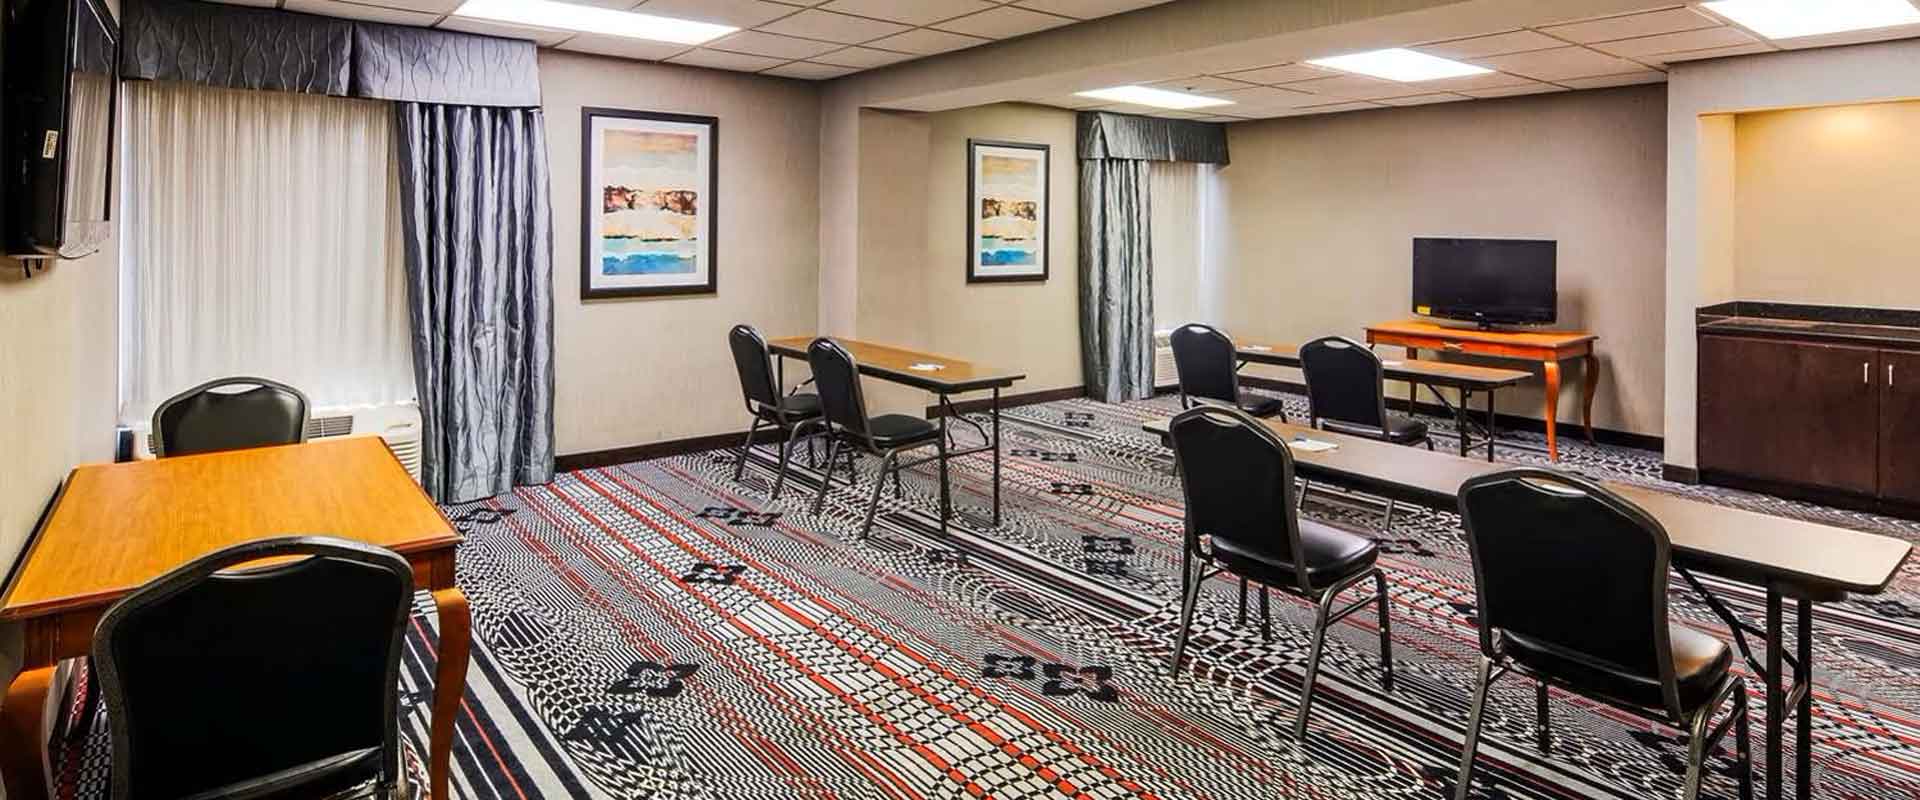 The Hotel at Dayton South | Dayton Newly Remodeled Hotels Motels in